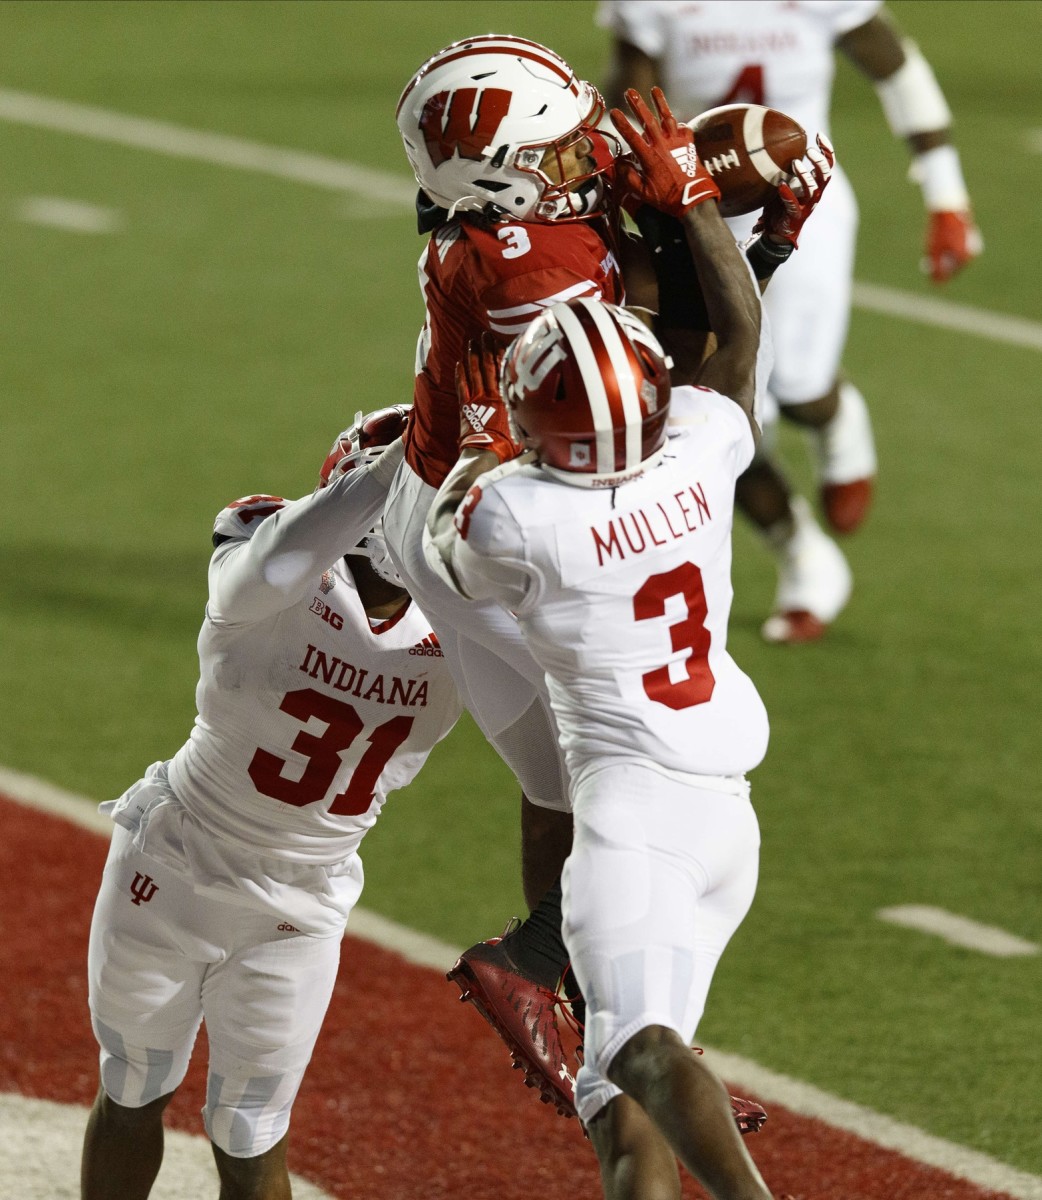 Indiana defensive backs Tiawan Mullen (3) and Bryant Fitzgerald (31) break up the pass intended for Wisconsin's Kendric Pryor.  (Jeff Hanisch-USA TODAY Sports)